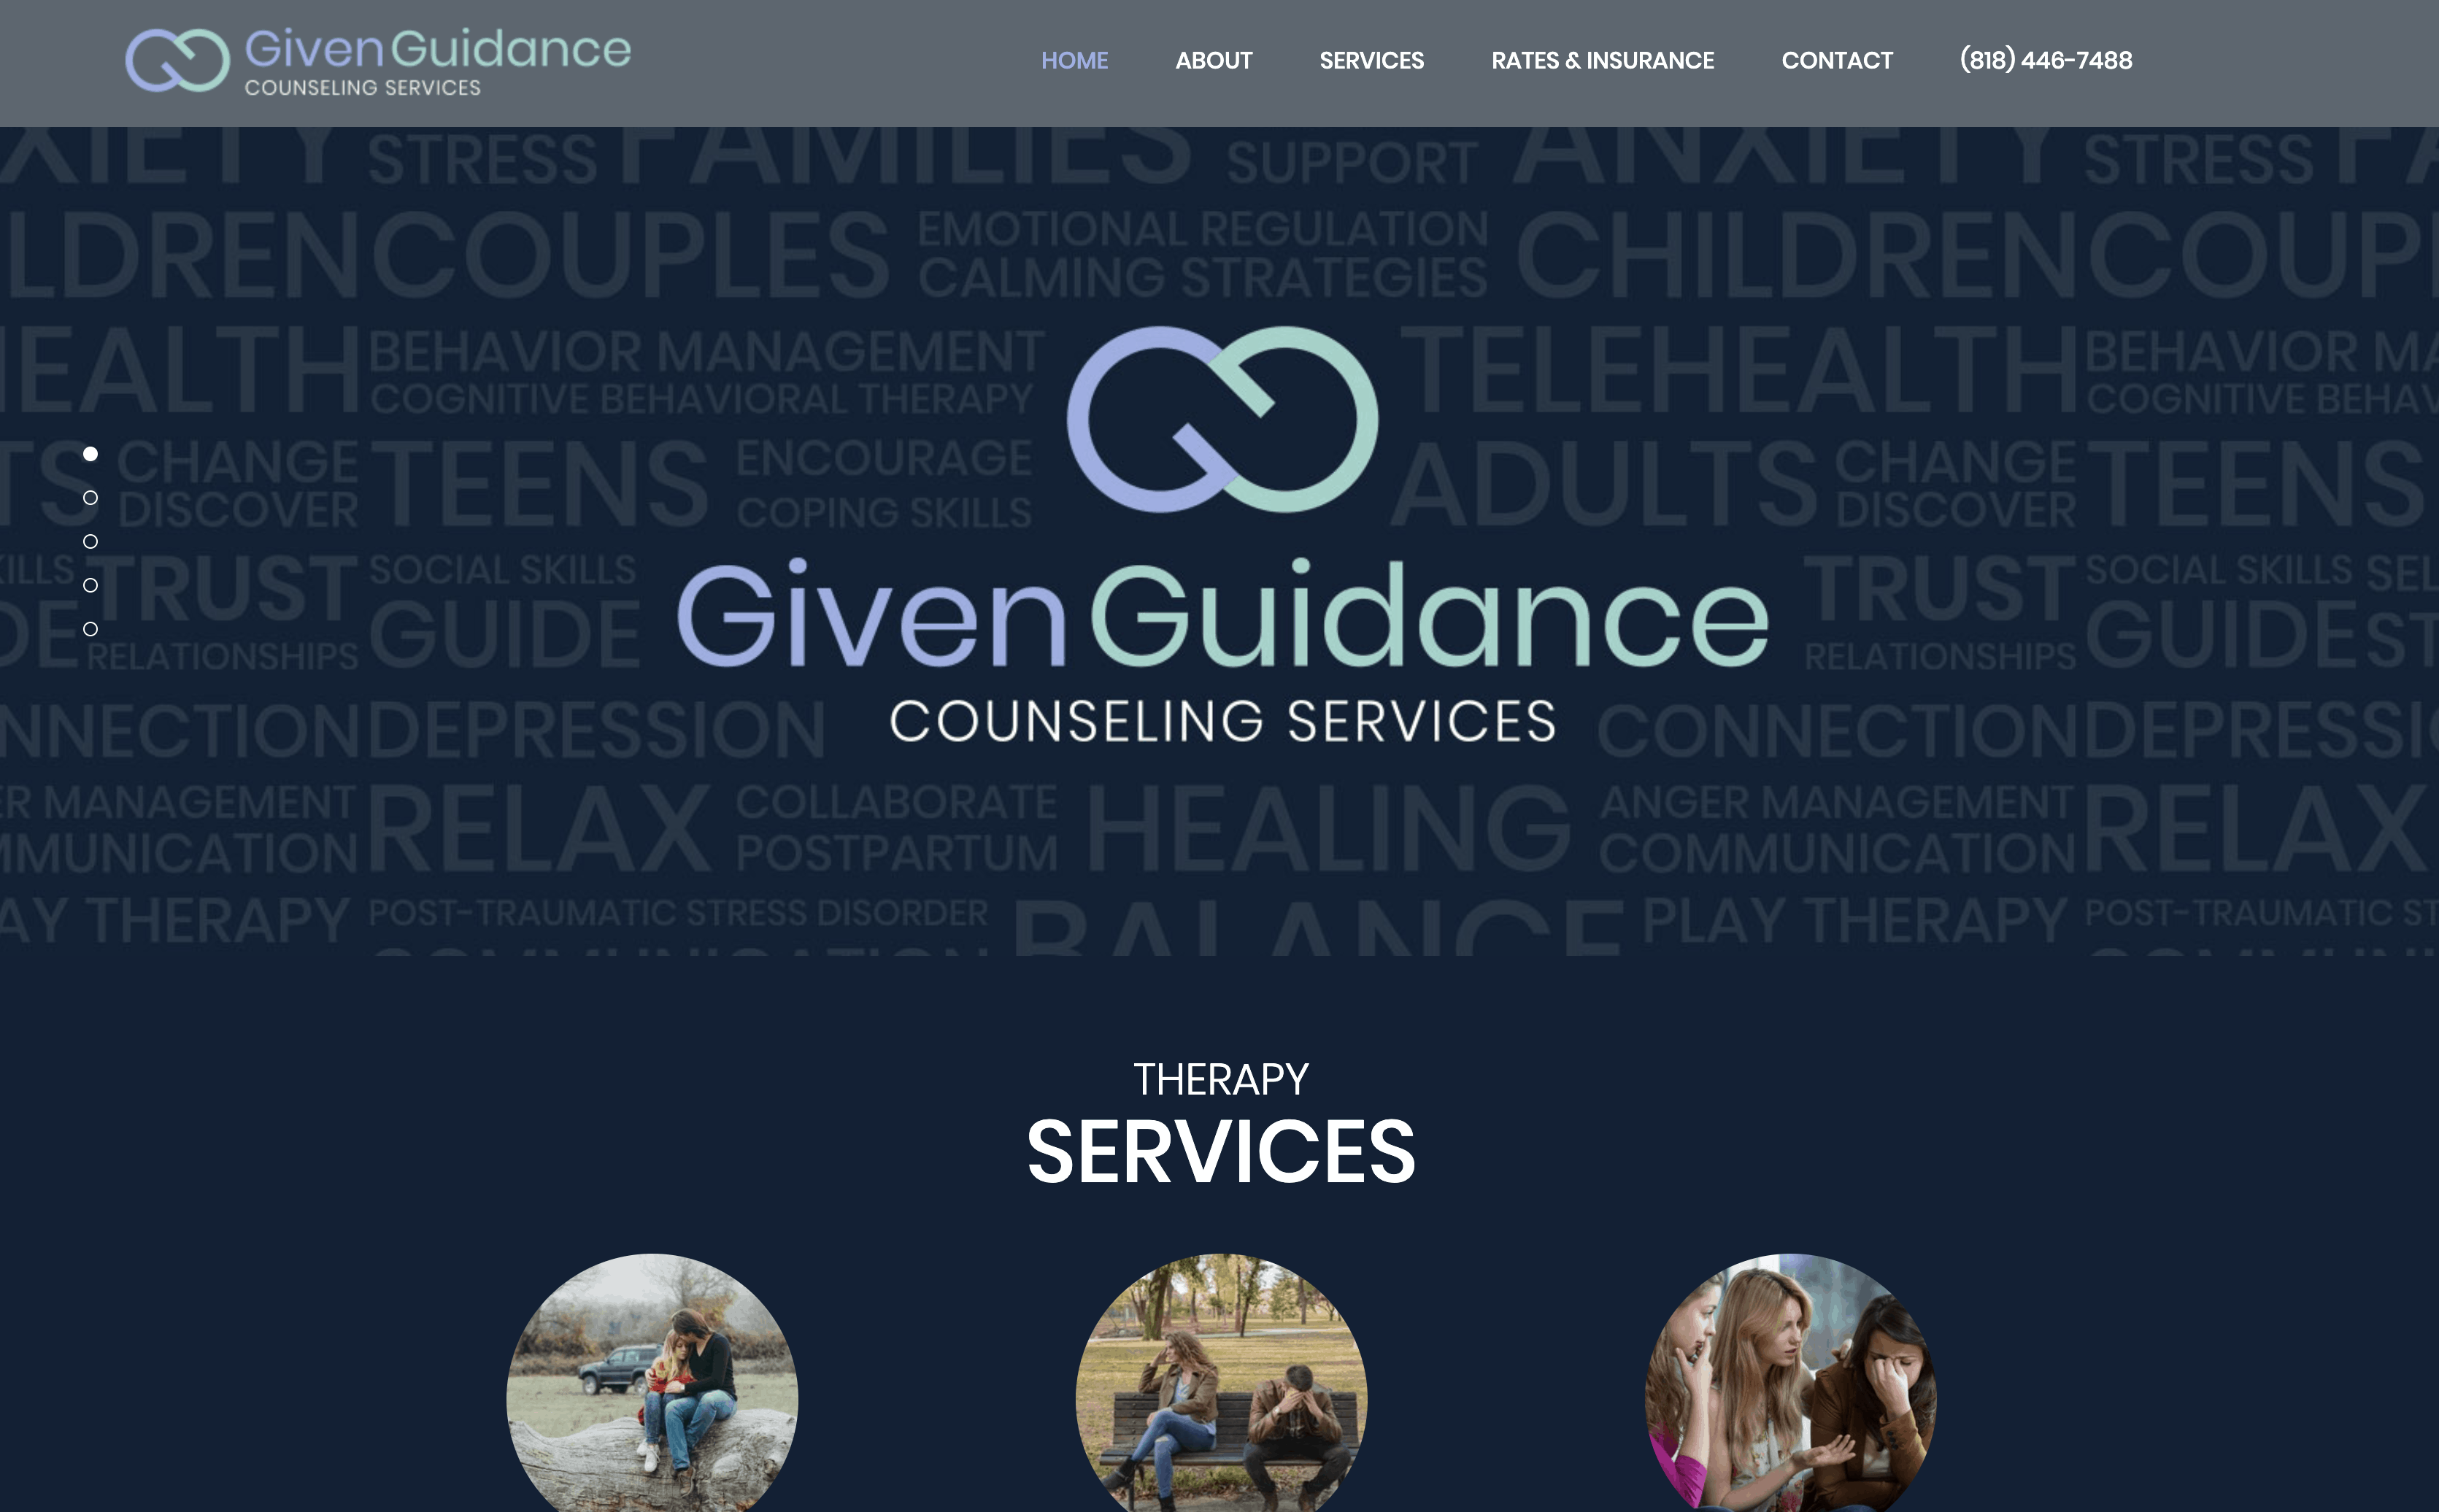 Given Guidance Homepage Design